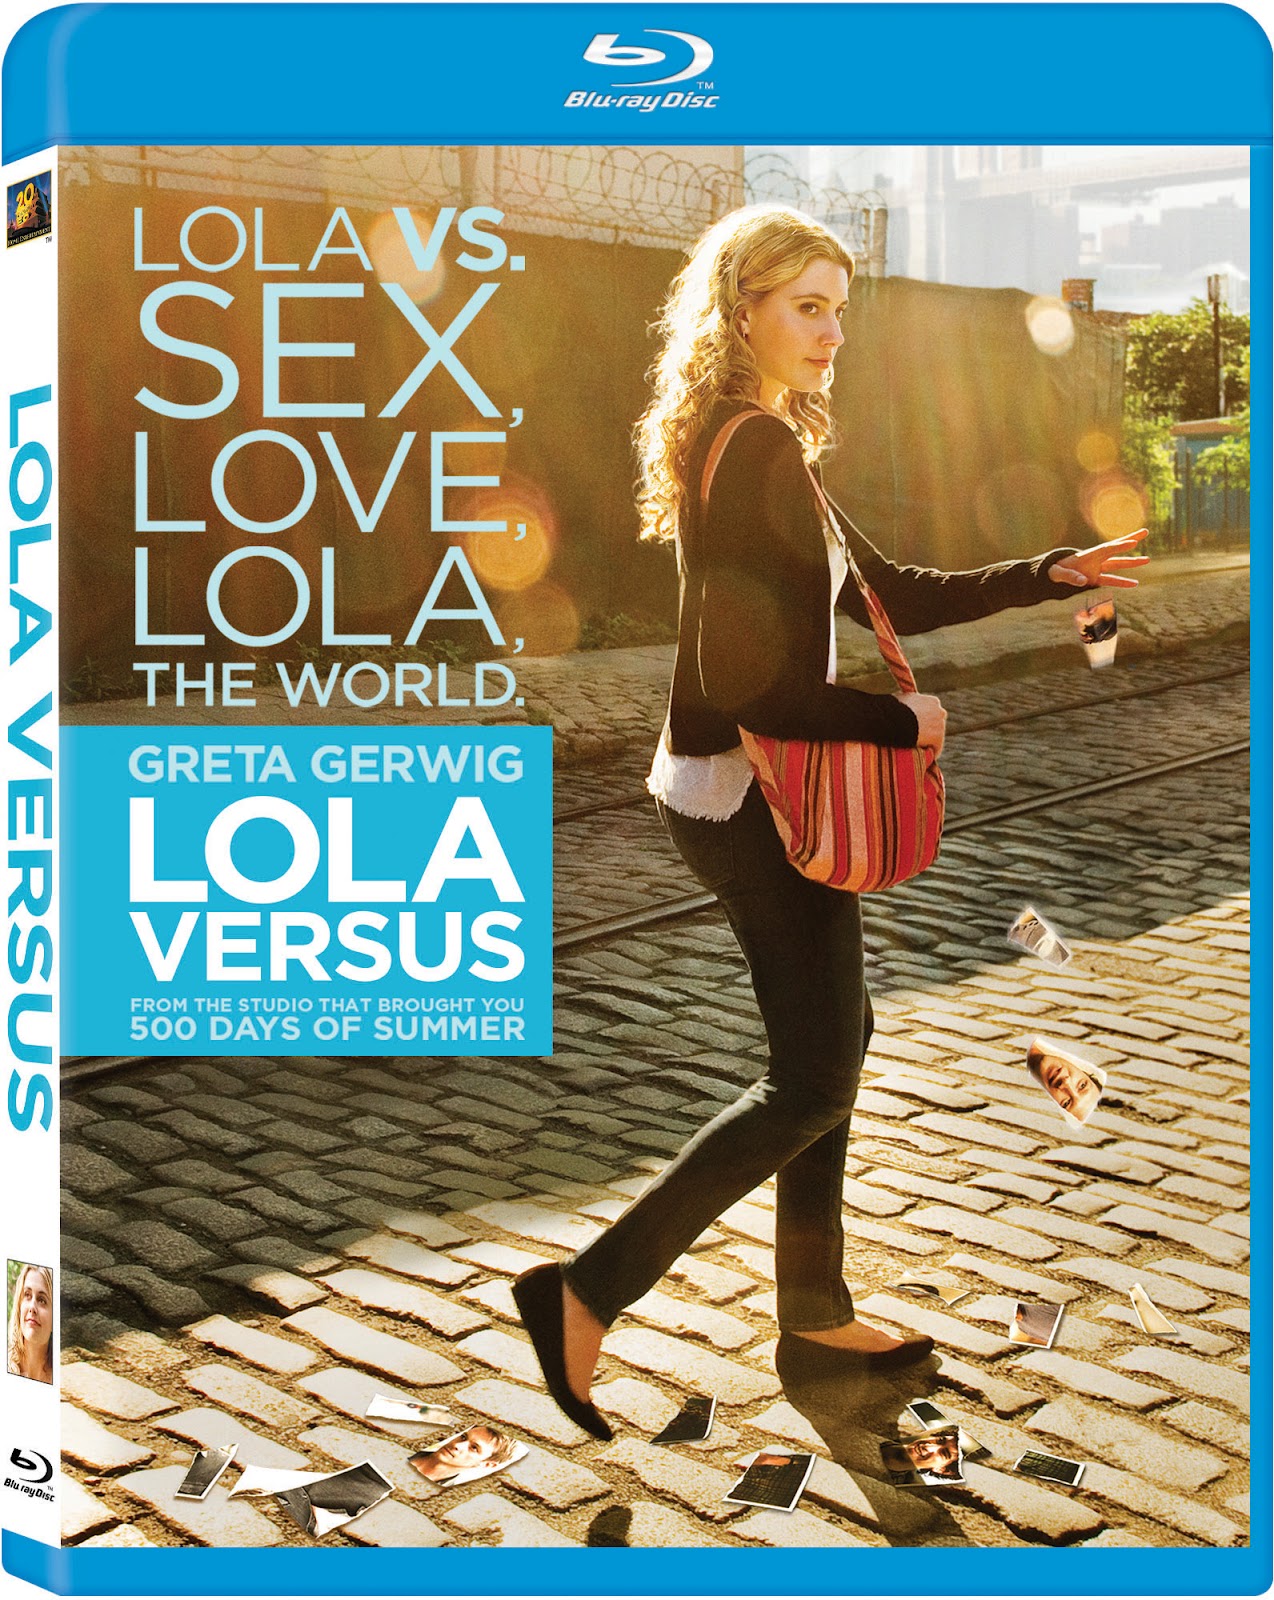 Lola Versus available on Blu-ray/DVD September 11th